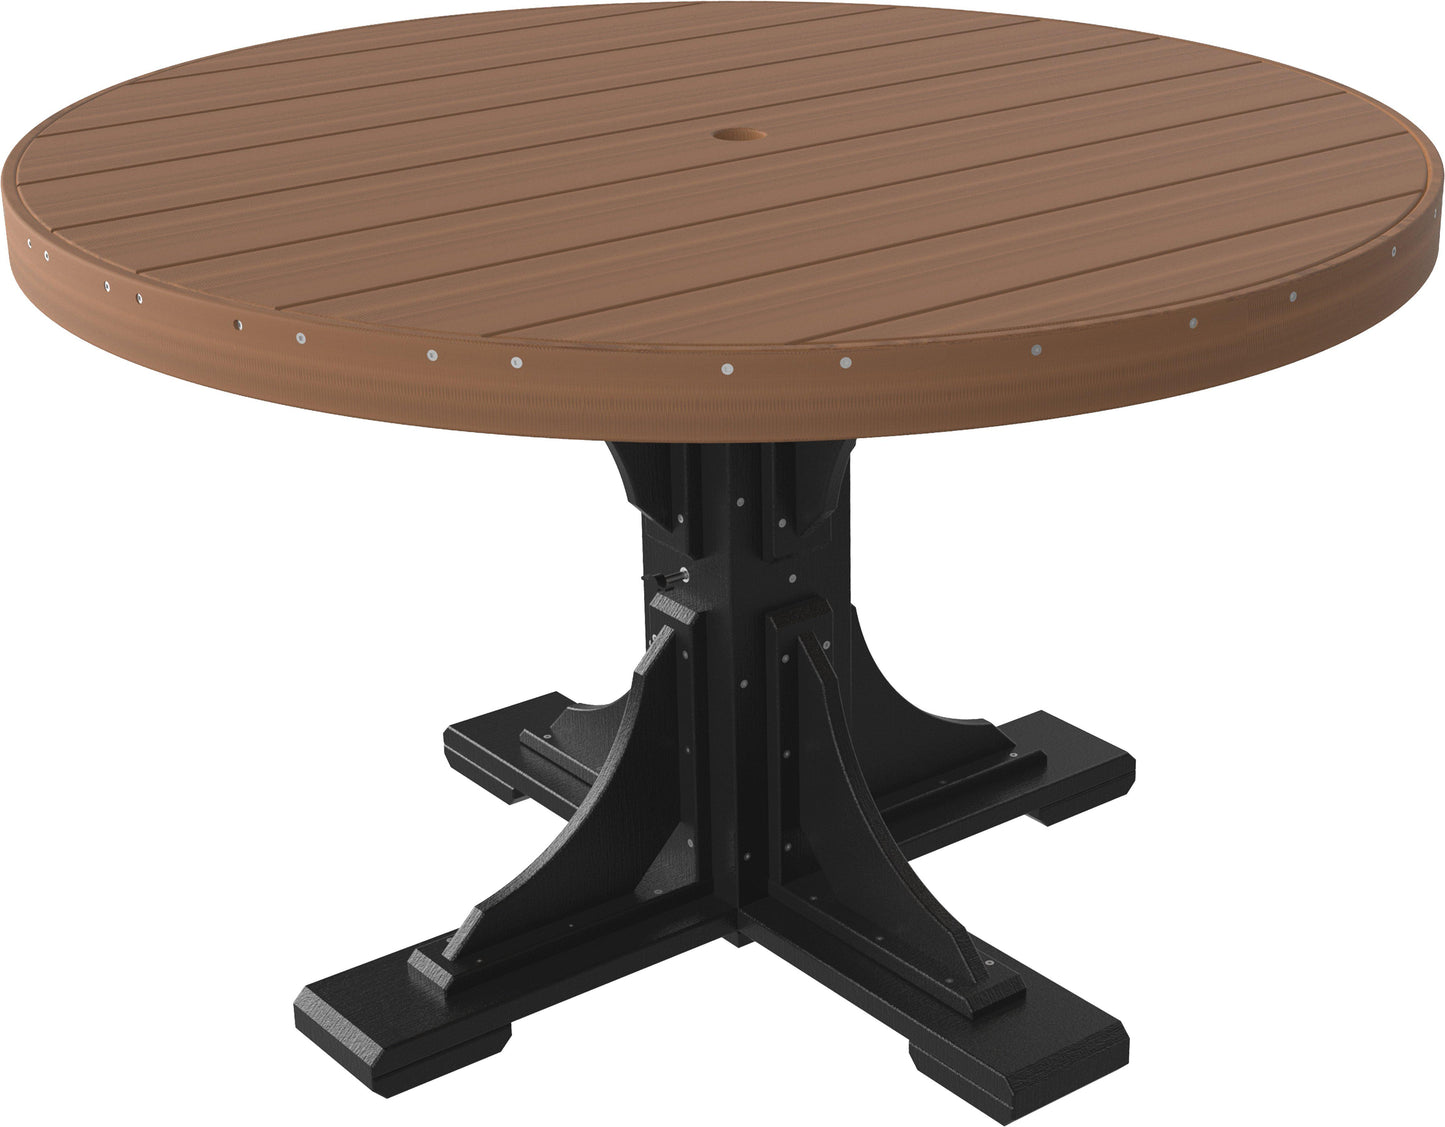 Luxcraft Recycled Plastic 4' Round Dining Height Table - LEAD TIME TO SHIP 3 TO 4 WEEKS